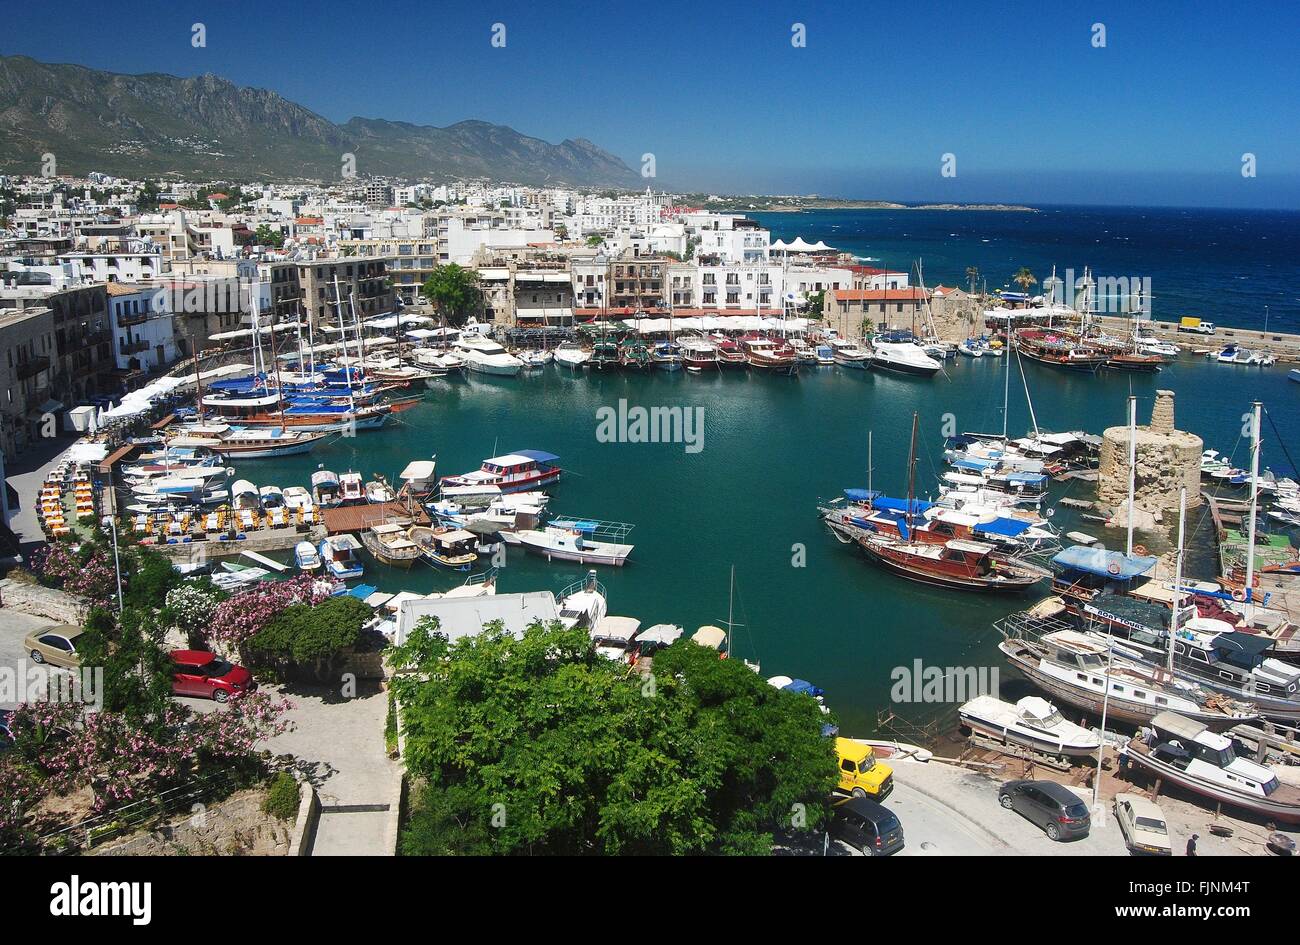 KYRENIA, CYPRUS – MAY 25. View over the Old Harbour in Kyrenia (Girne), Cyprus on May 25, 2013. Stock Photo